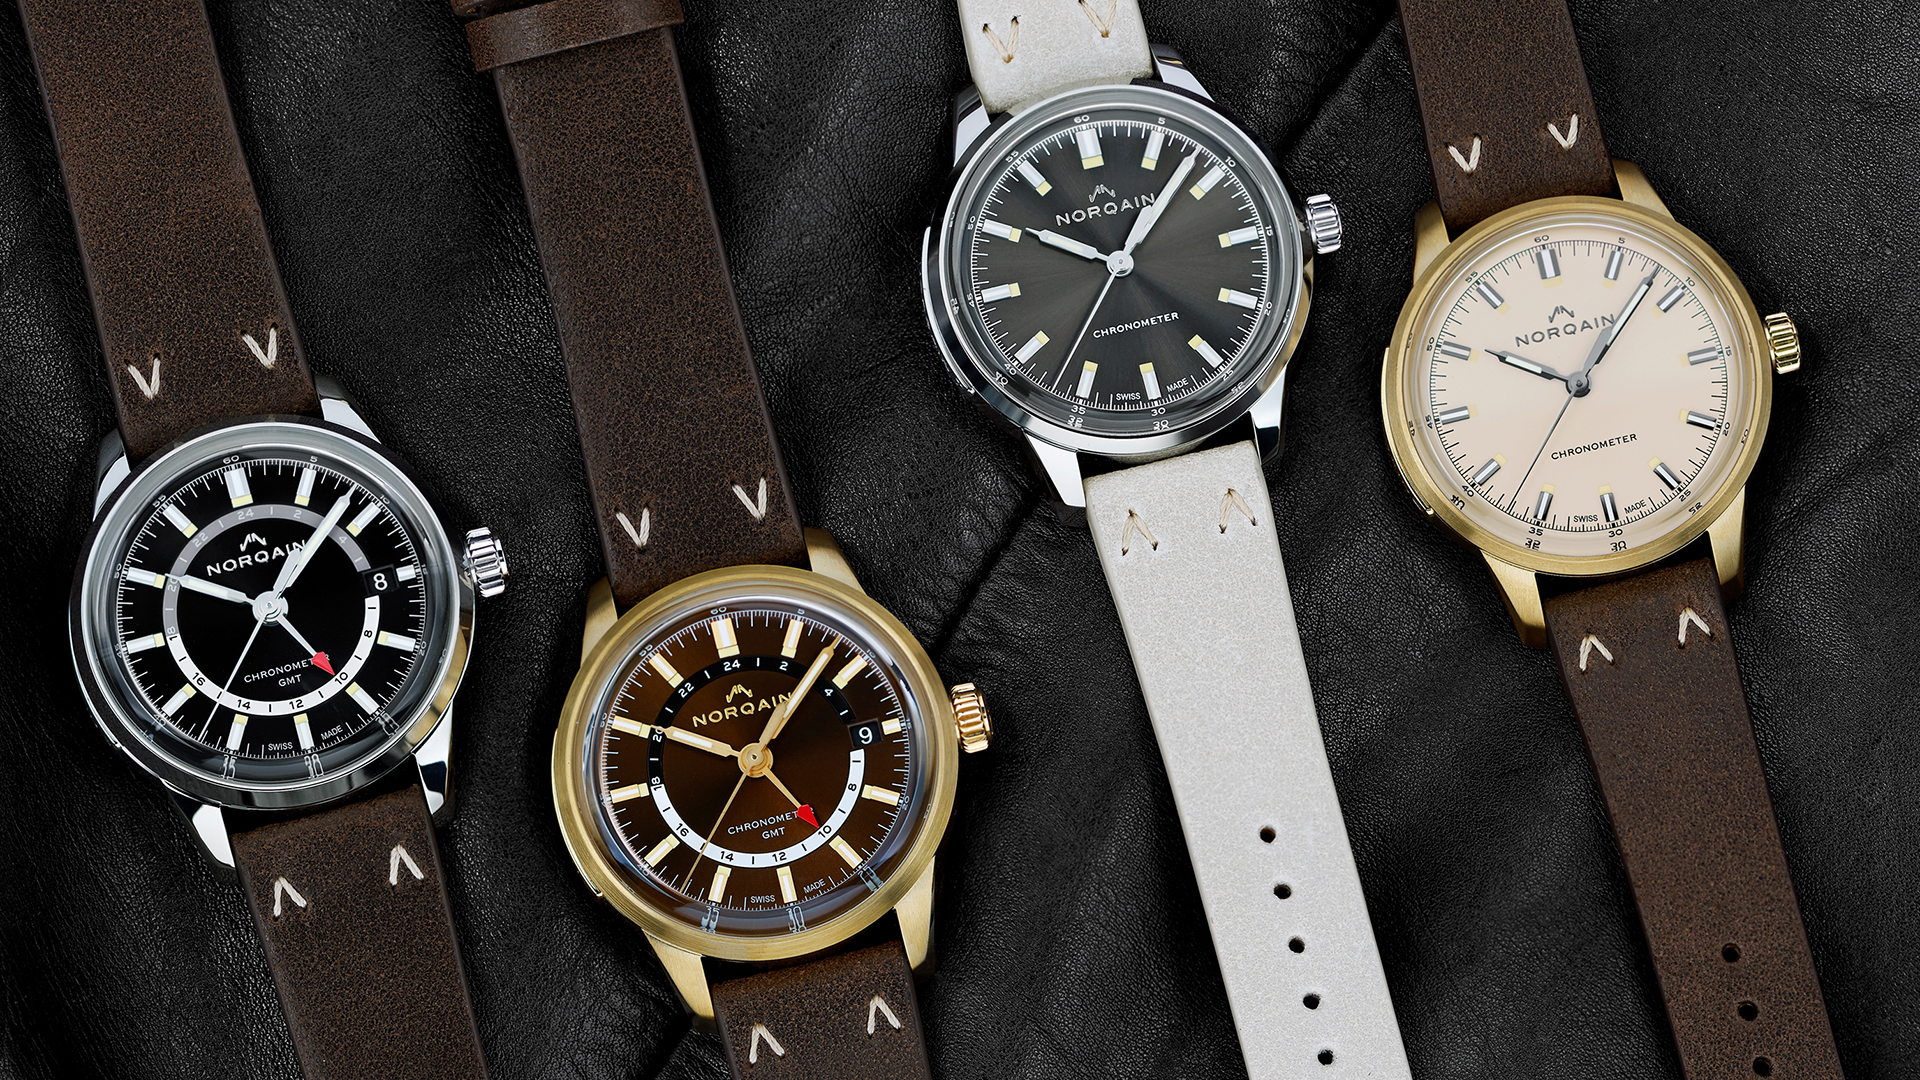 NORQAIN Debuts Freedom 60 GMT And Freedom 60 39mm Watches